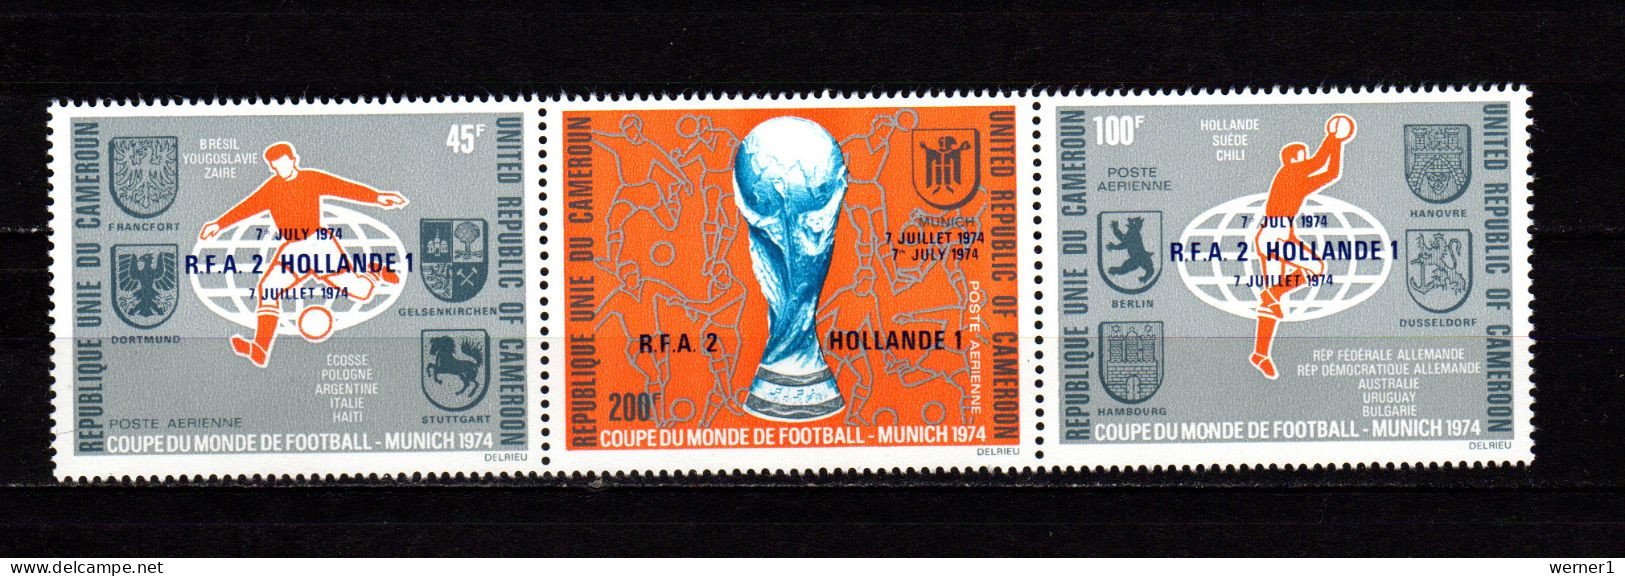 Cameroon - Cameroun 1974 Football Soccer World Cup Strip Of 3 With Winners Overprint MNH - 1974 – Allemagne Fédérale